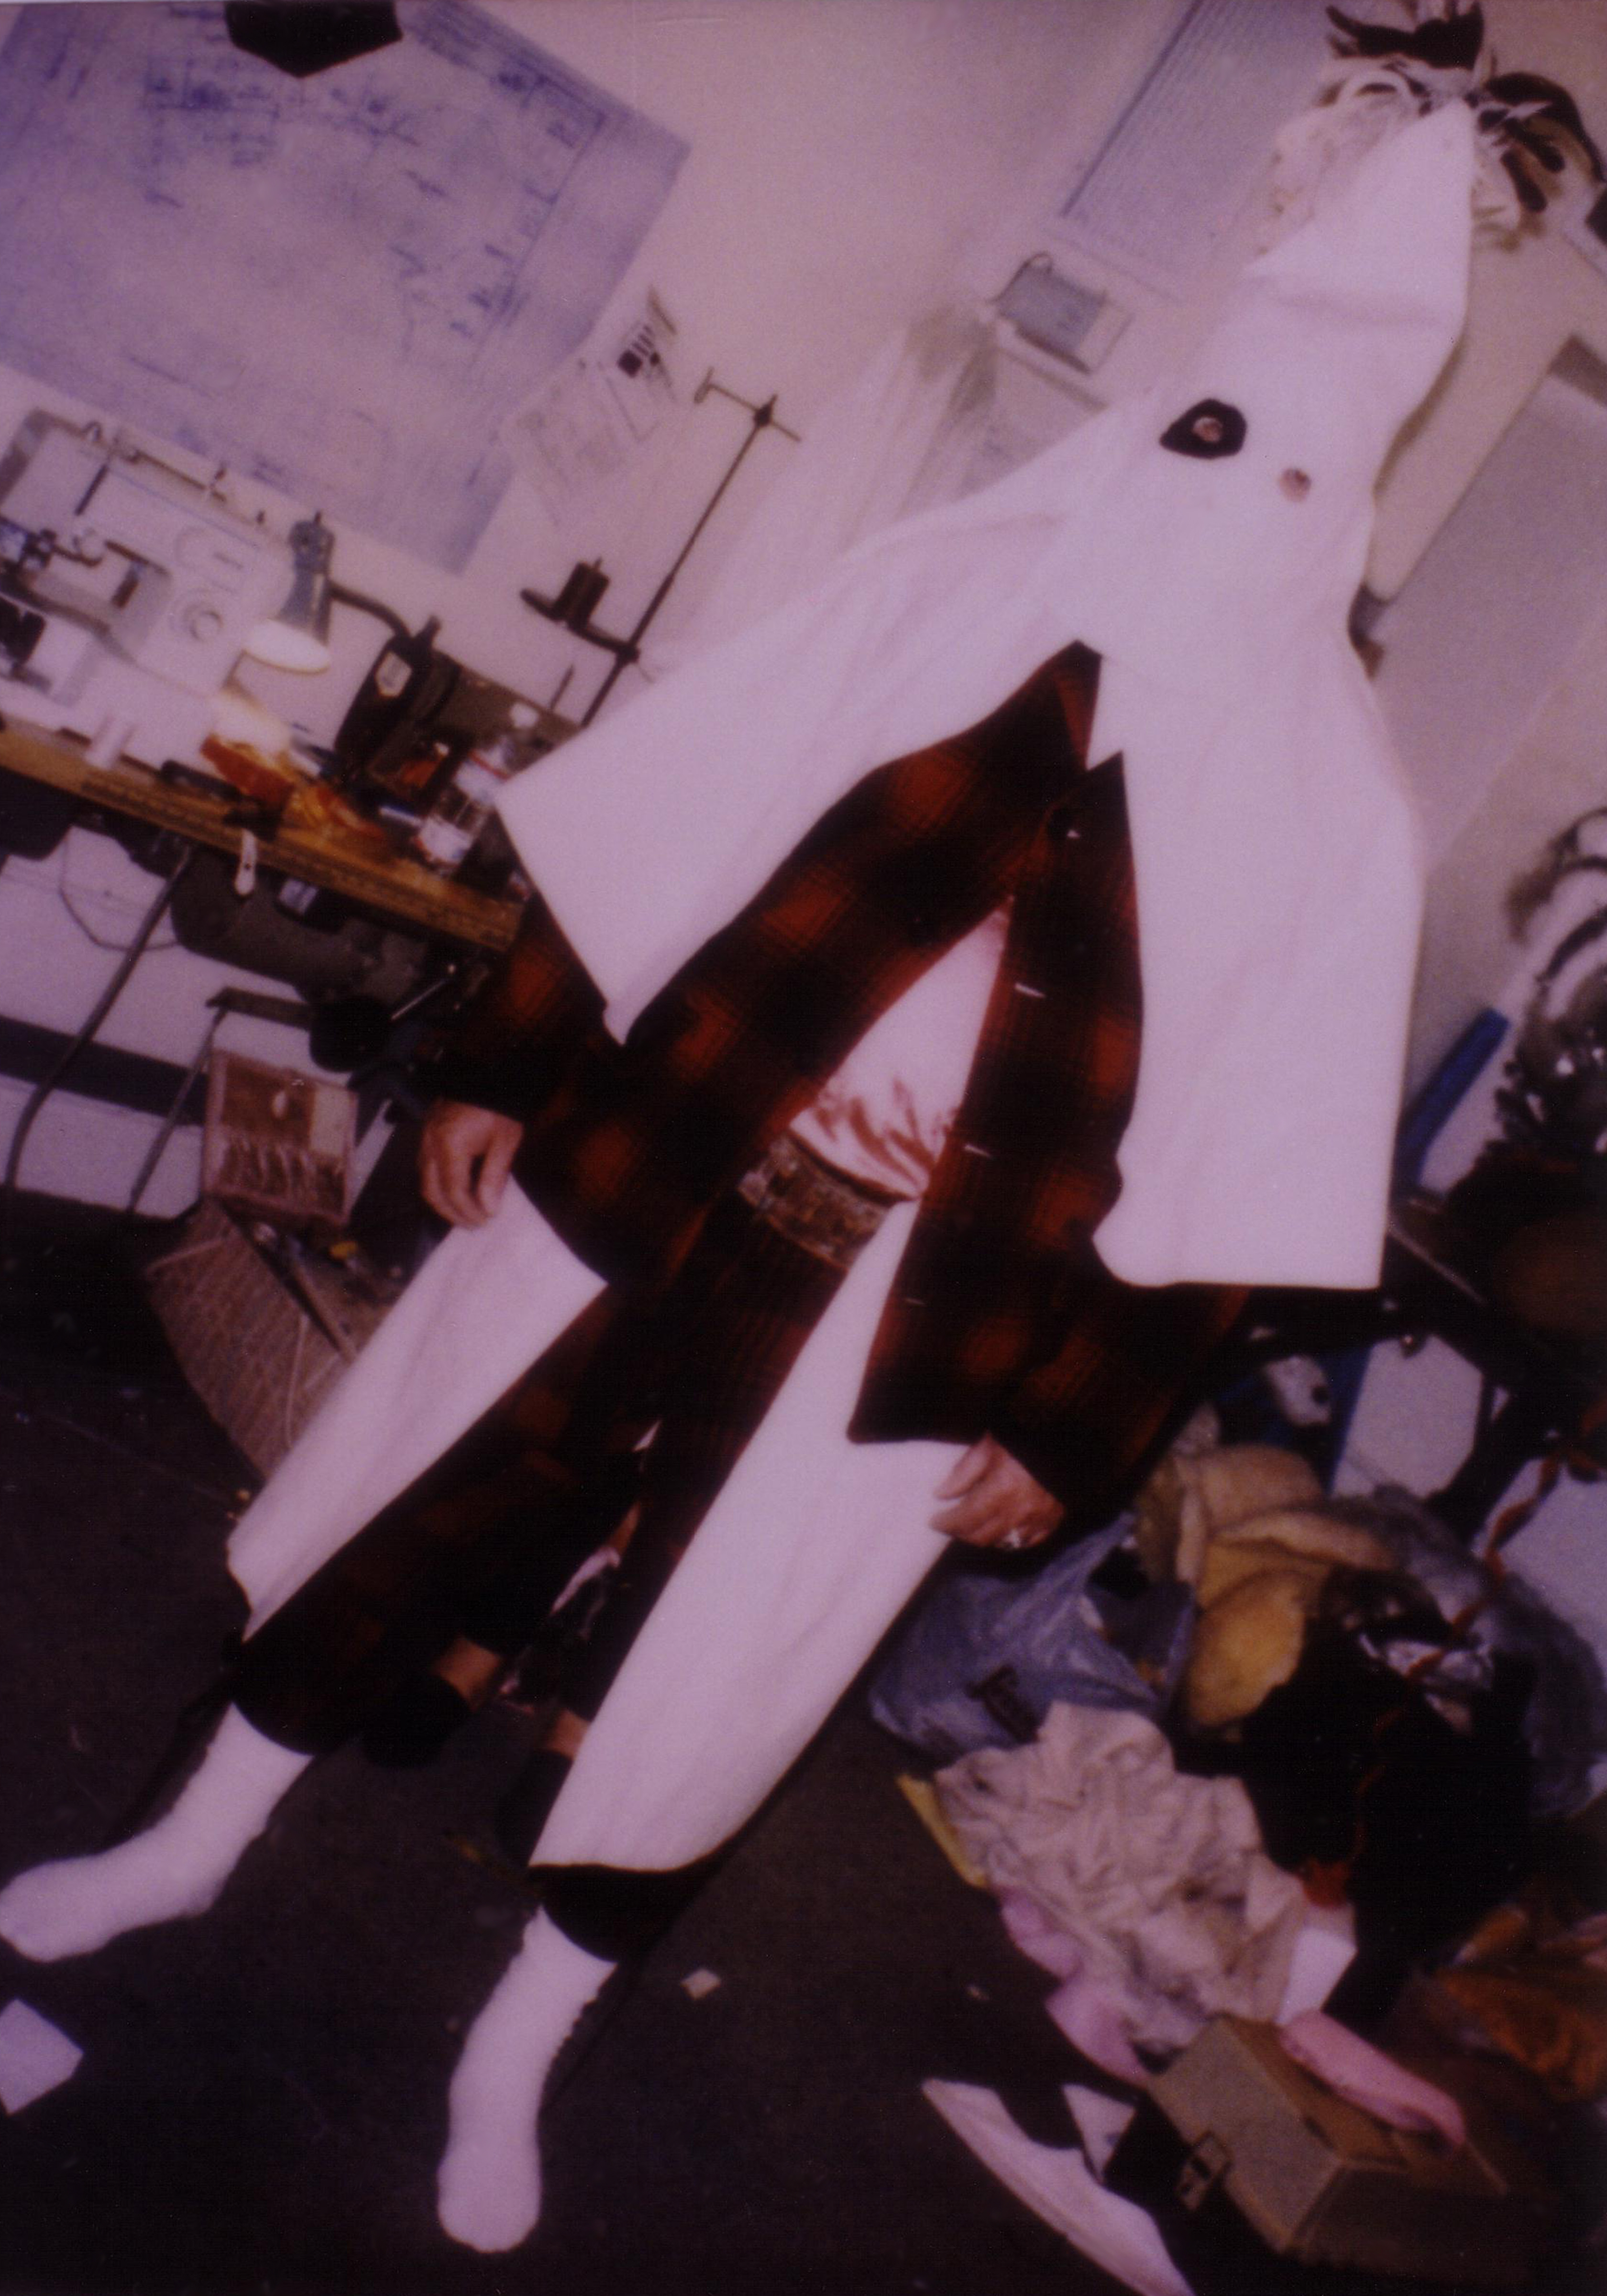 Seth wearing the wardrobe being designed by 1979 Tony Award Nominated Costume Designer Julie Weiss, for his Ku Klux Klansman character role in the feature film Fear and Loathing in Las Vegas (1998)